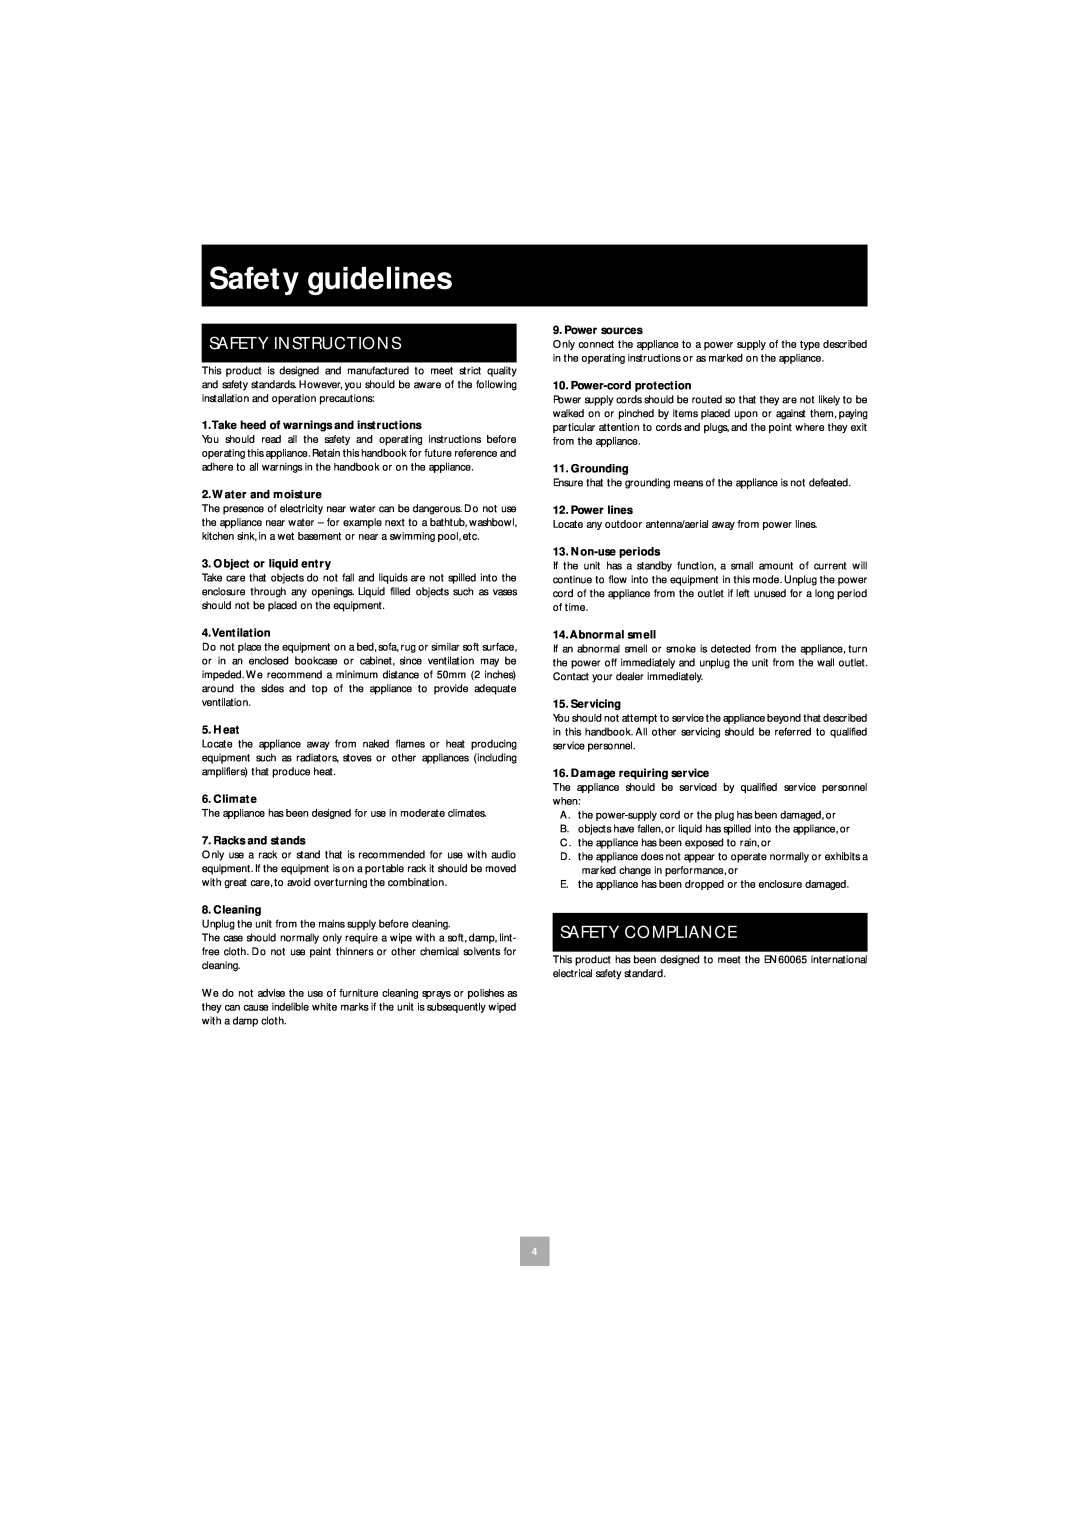 Arcam P35, A32 manual Safety guidelines, Safety Instructions, Safety Compliance 